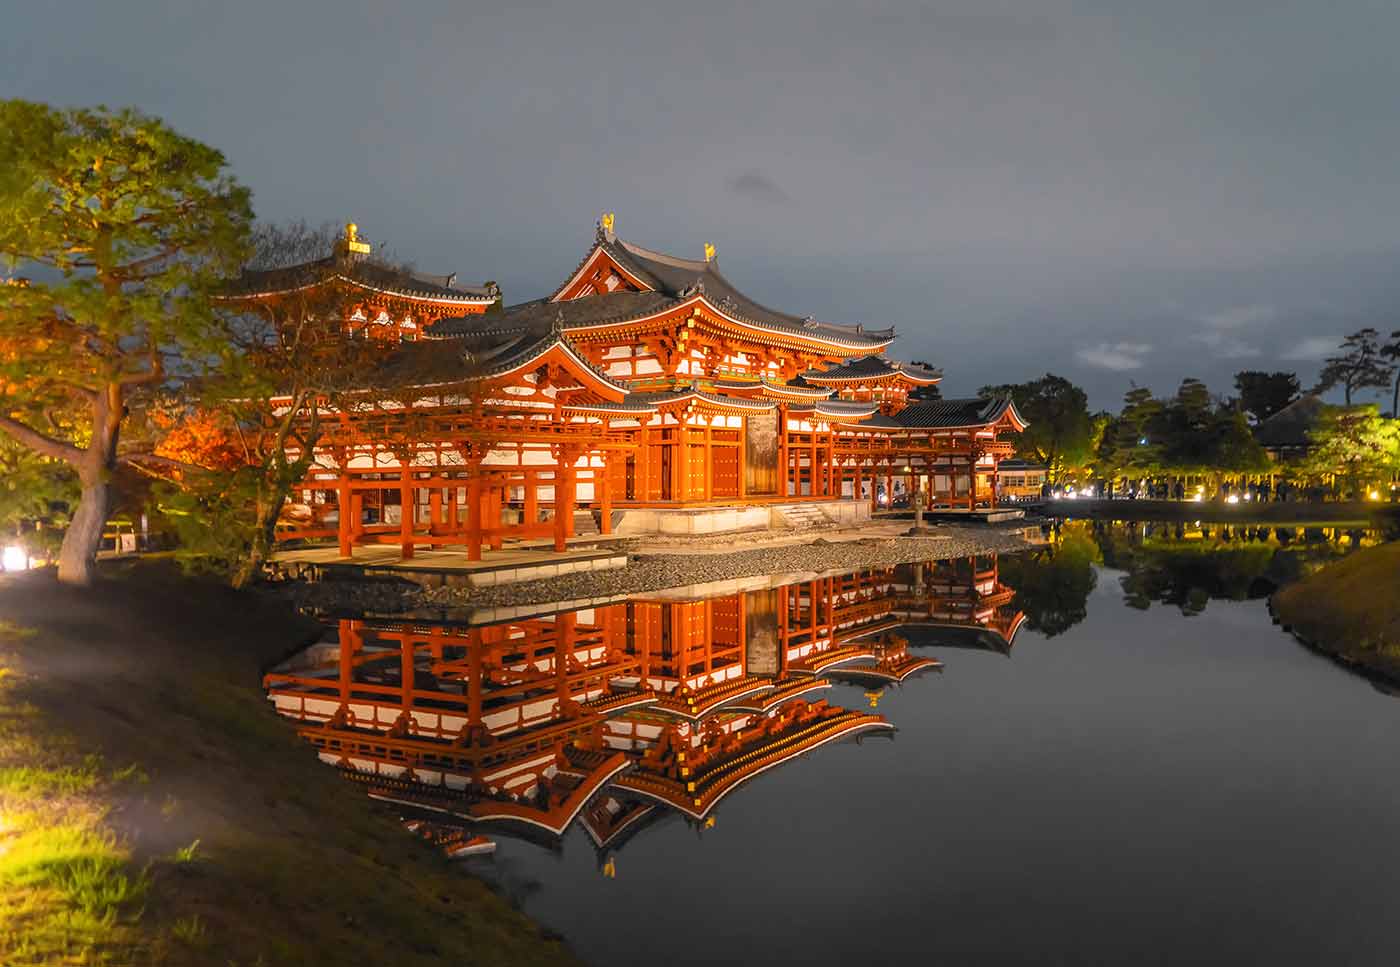 Byodoin Temple Pagoda in Kyoto, Japan - Business First Travel